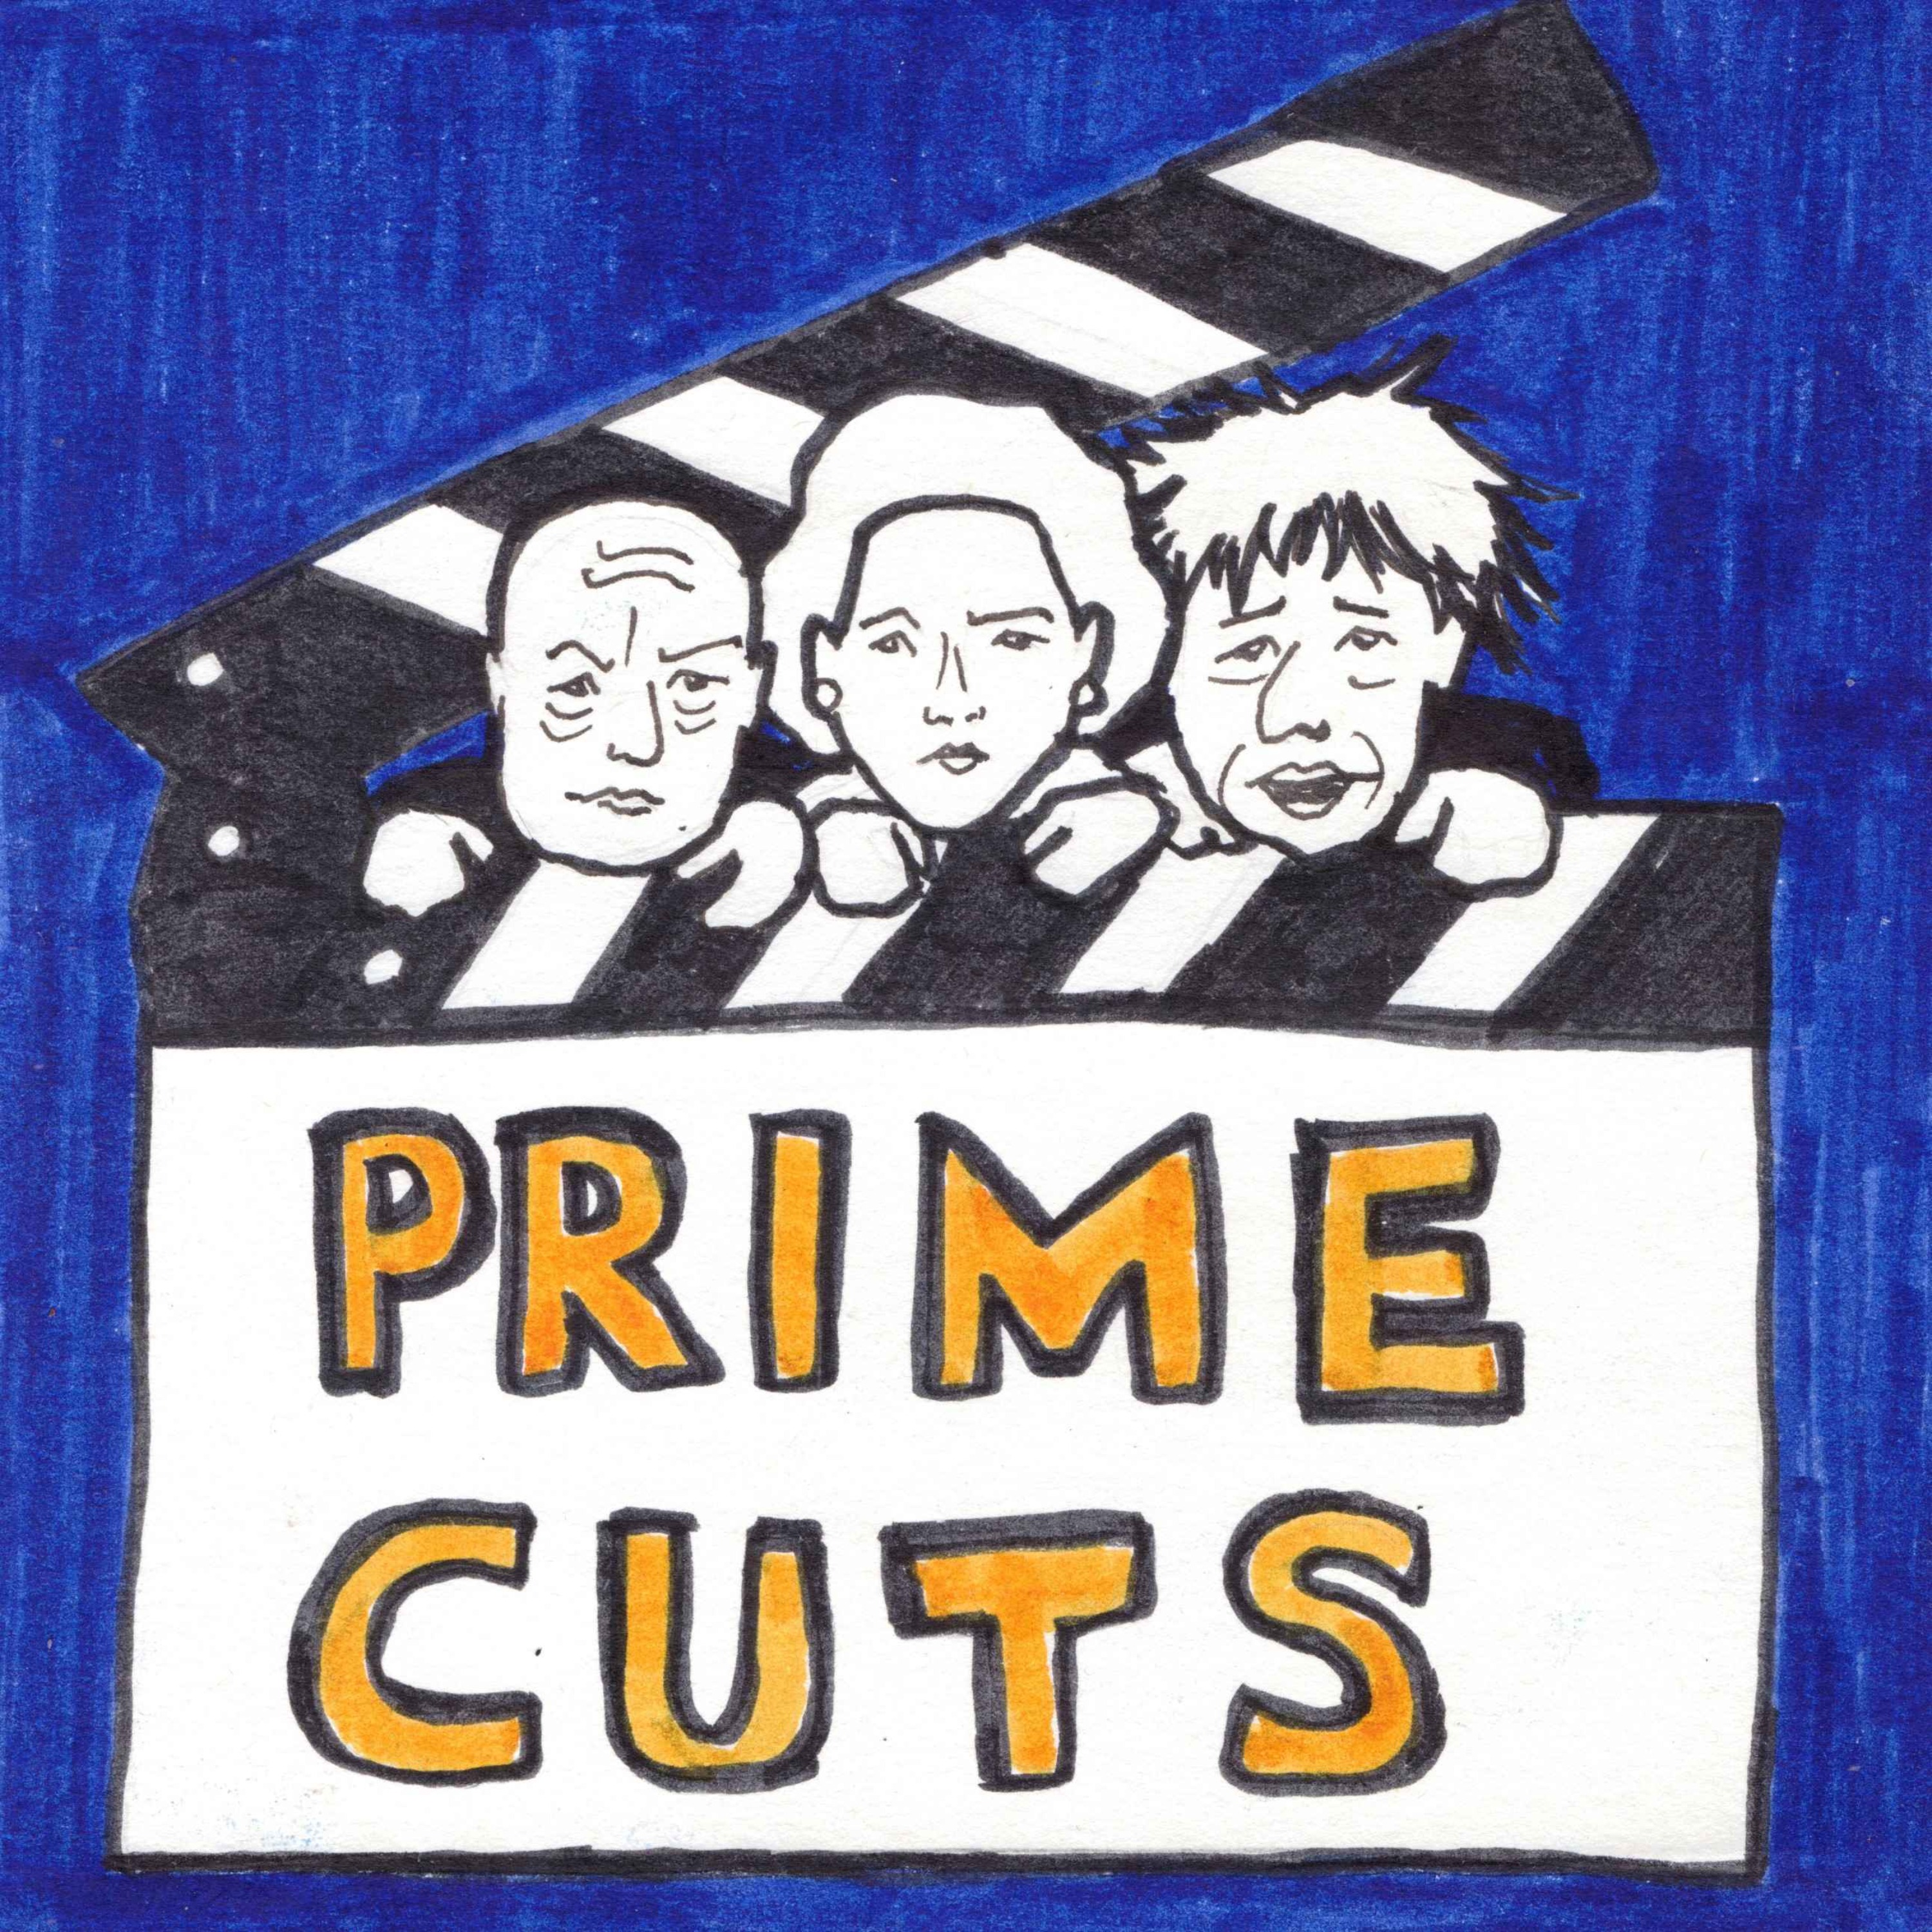 Prime Cuts: What's happening with Mr Speaker?